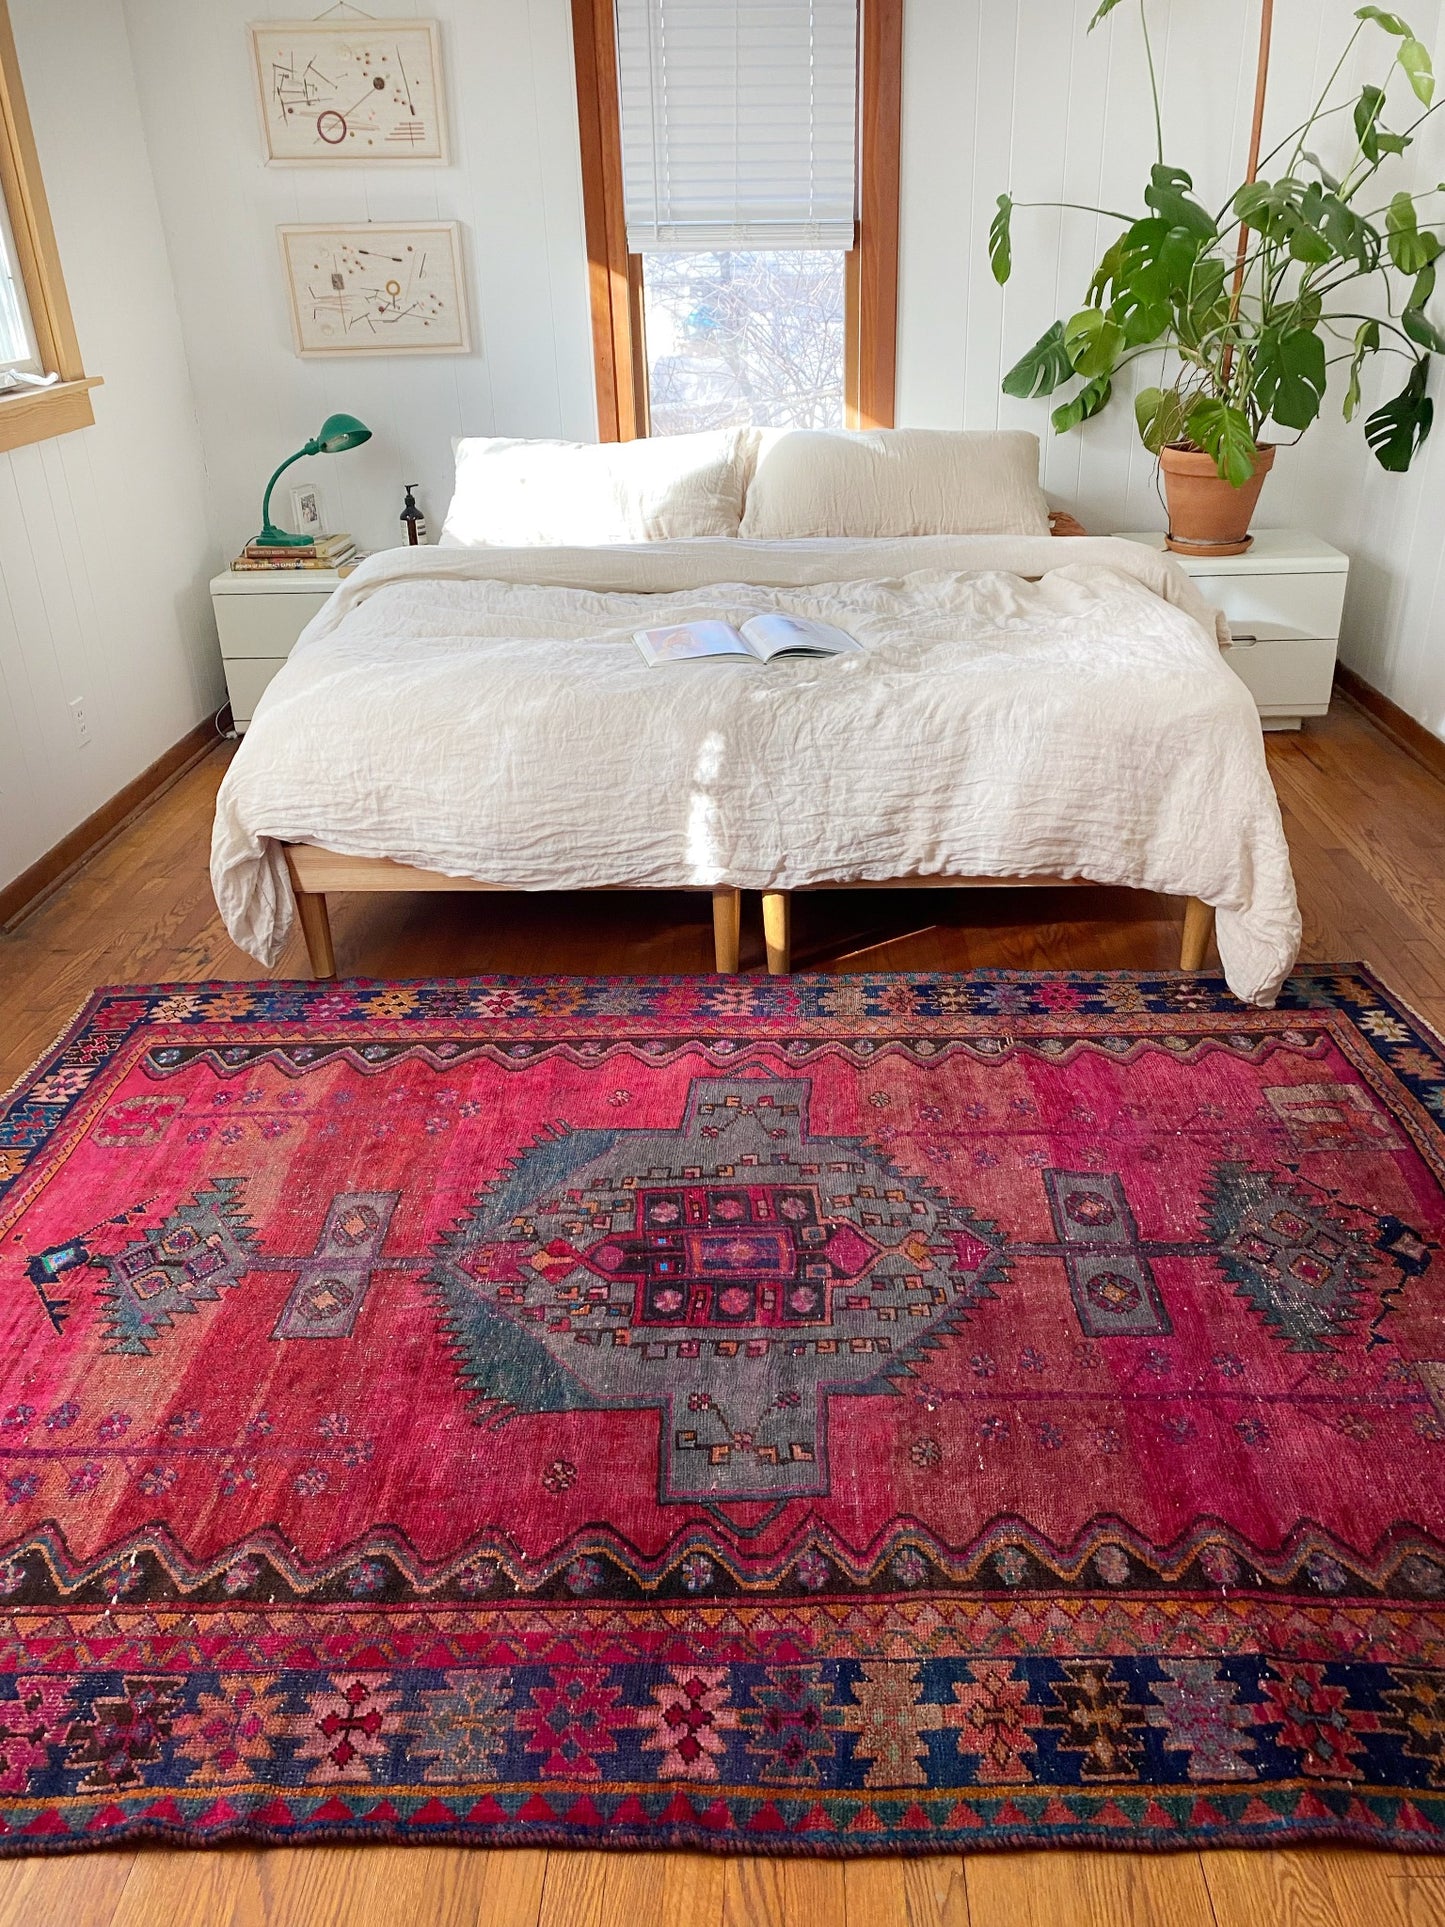 Style Pentas Persian Rug with a King Size Bed